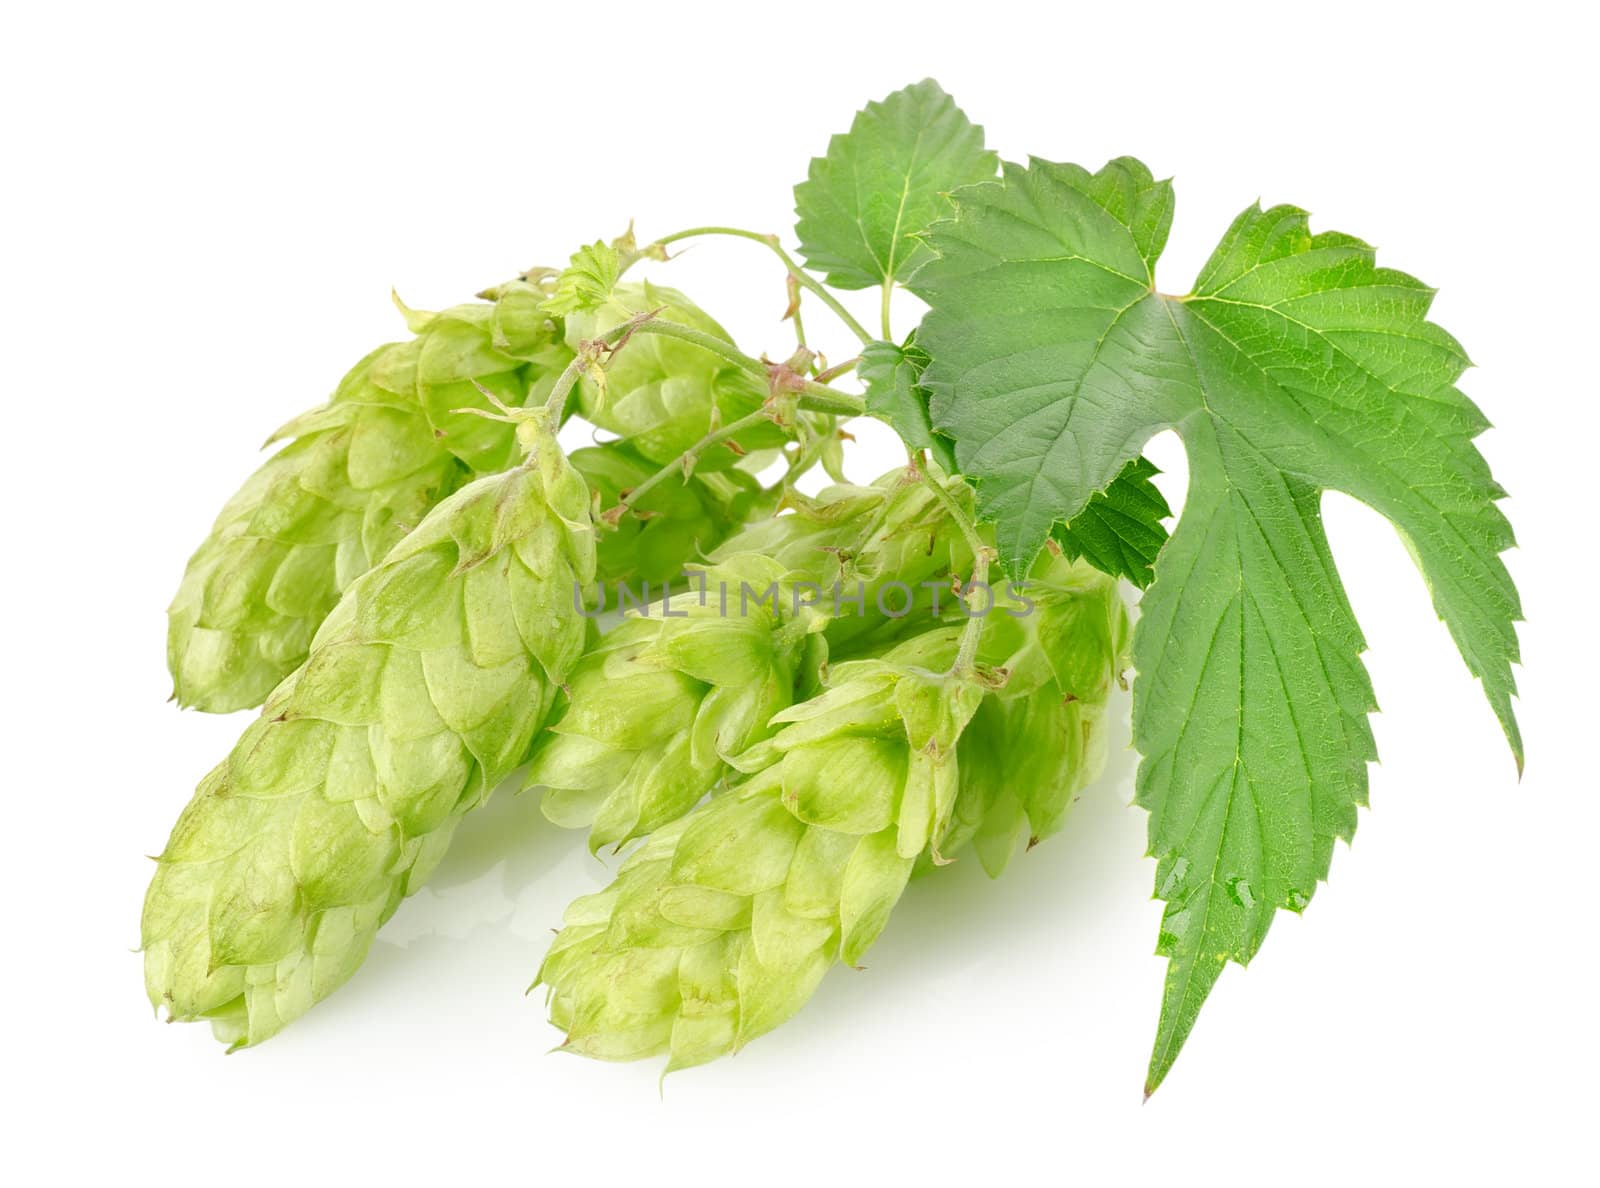 Cluster of hops by Givaga